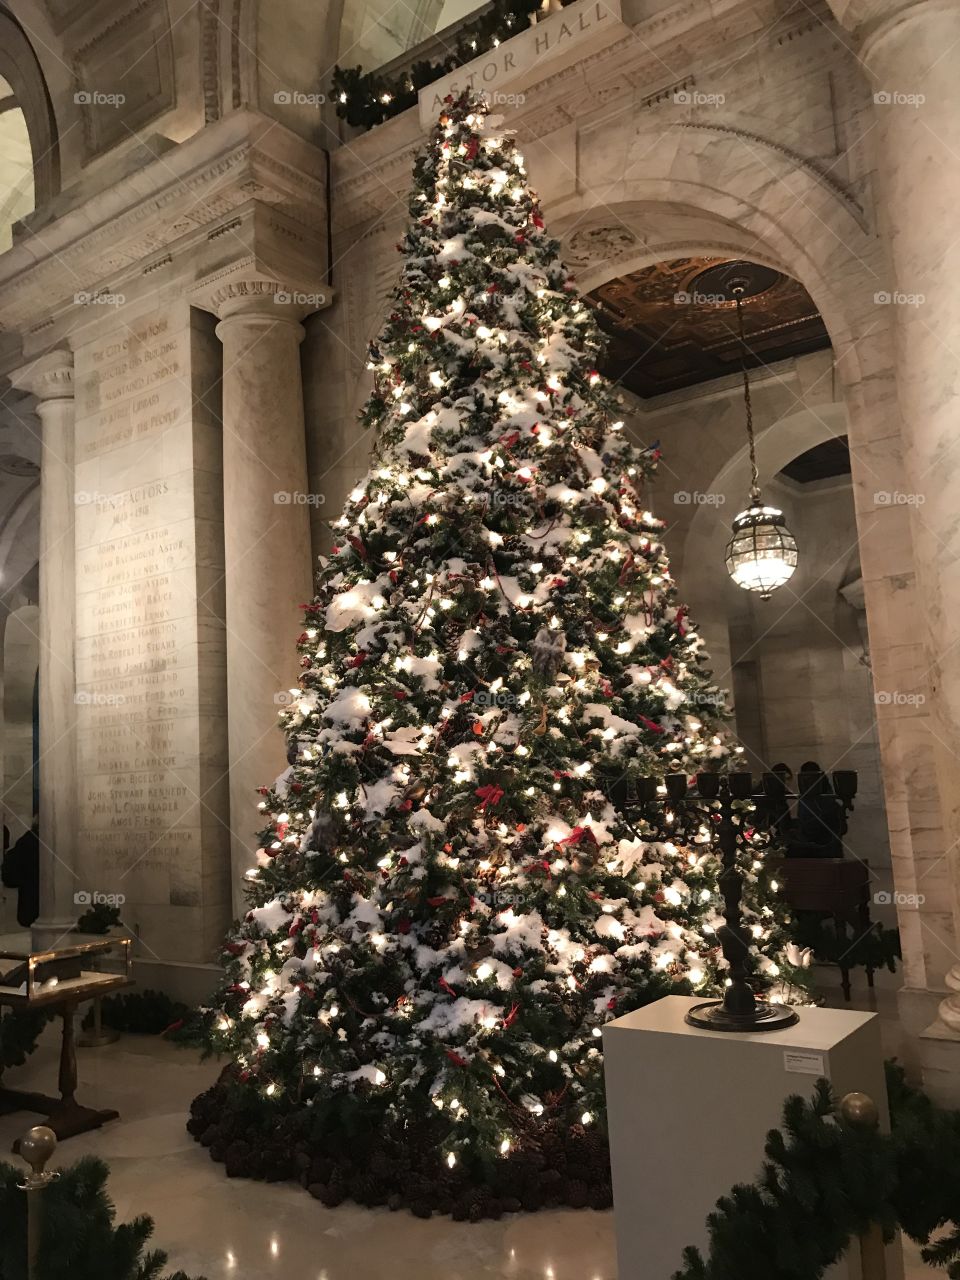 Holiday tree in the main branch of the New York Public Library.